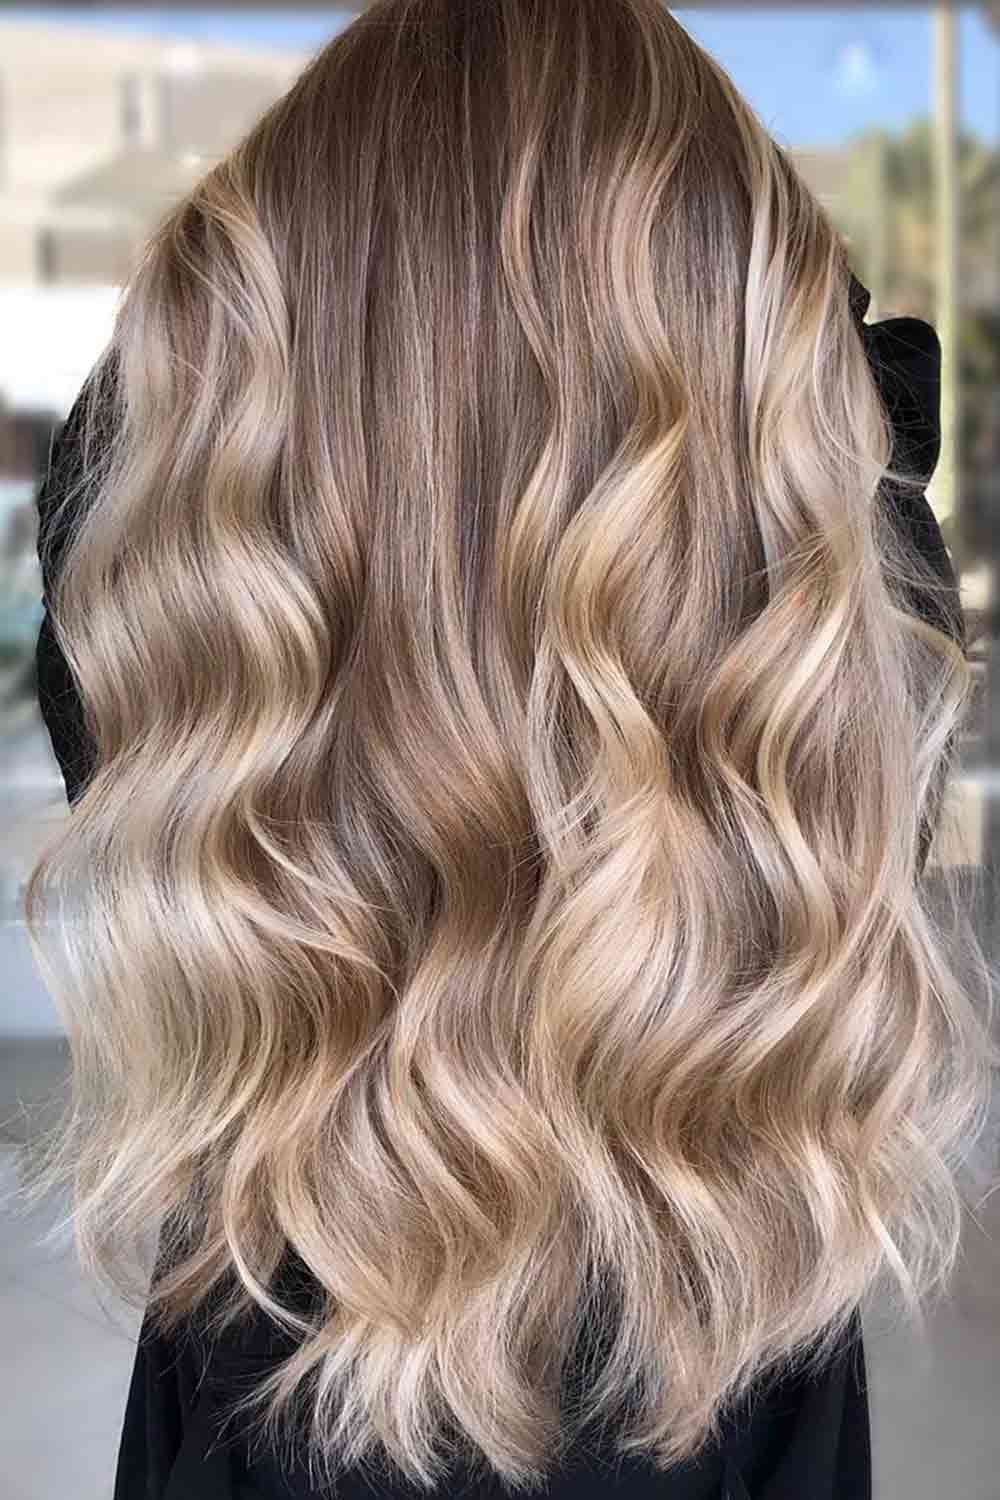 Dirty Blonde Ombre Hair With Long Layers